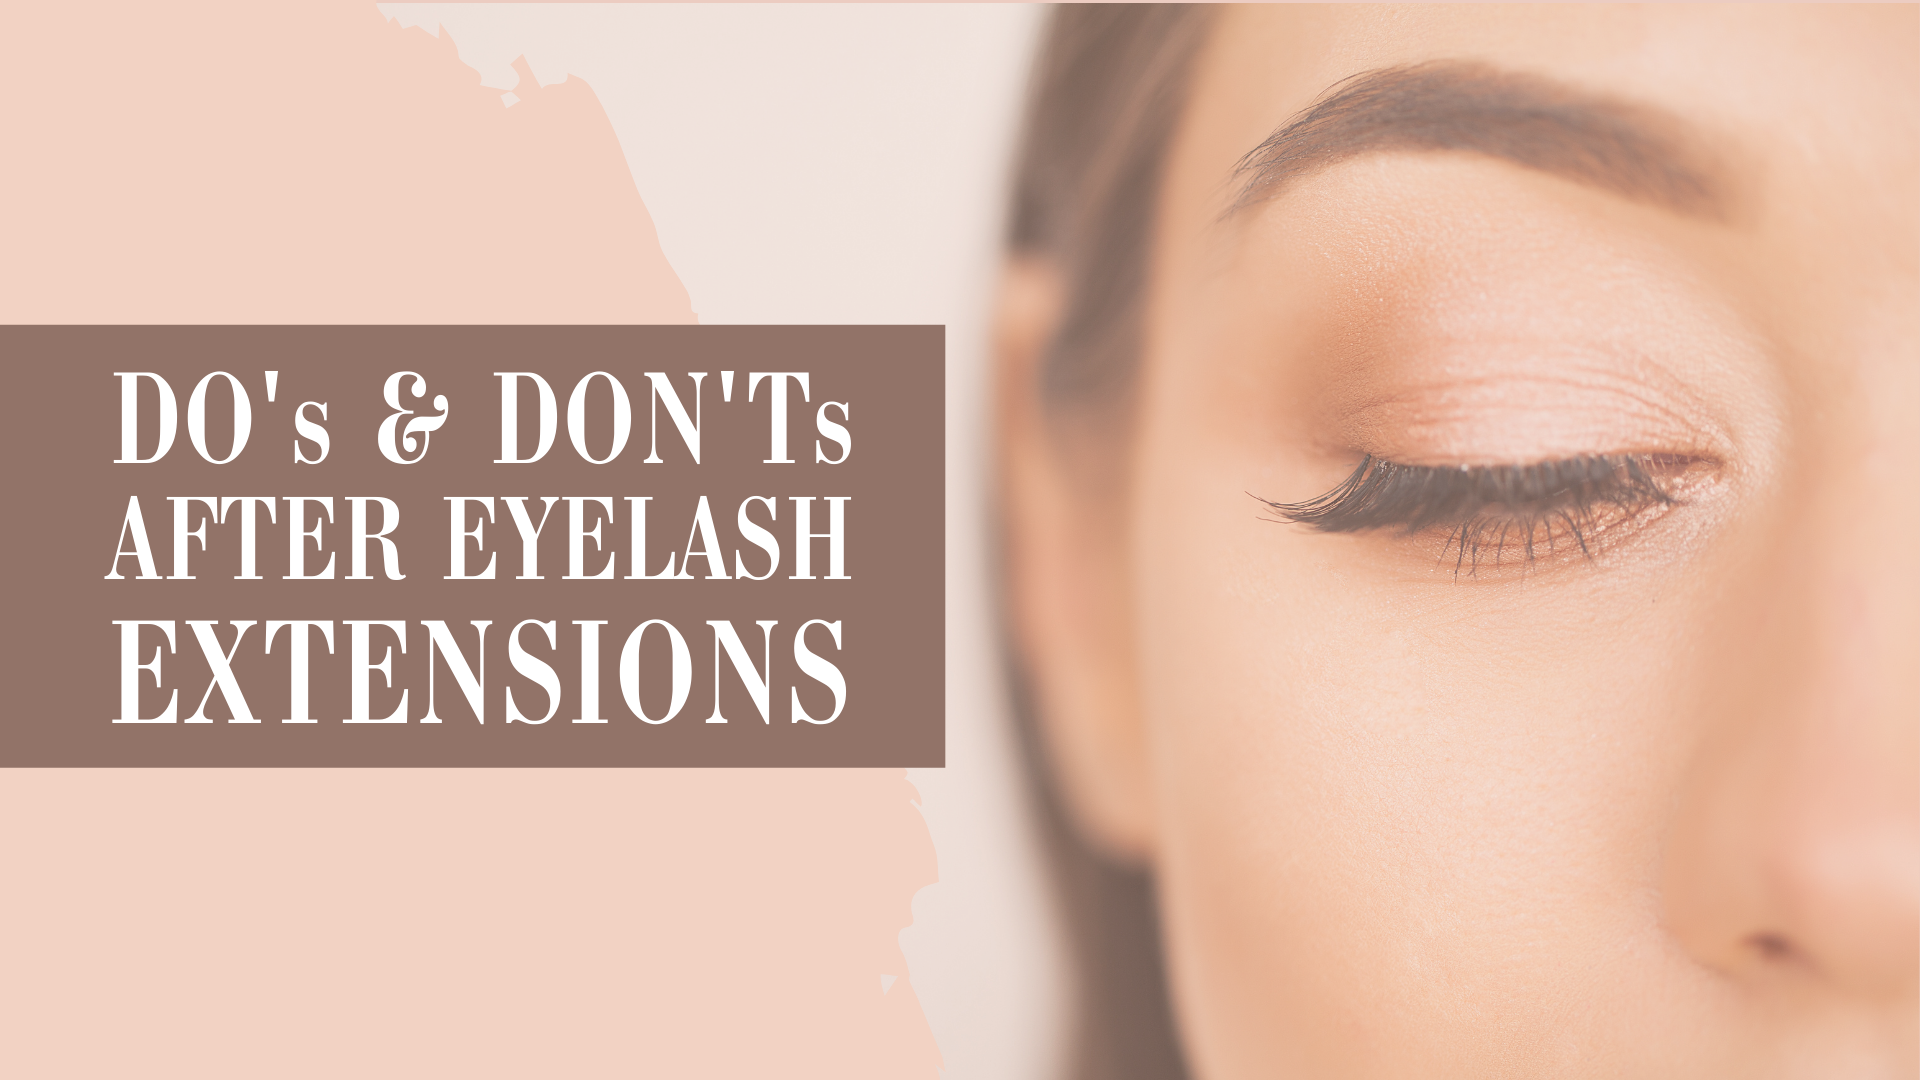 NJ Lash Studio Discusses The Do's and Don'ts After Getting Eyelash Extensions